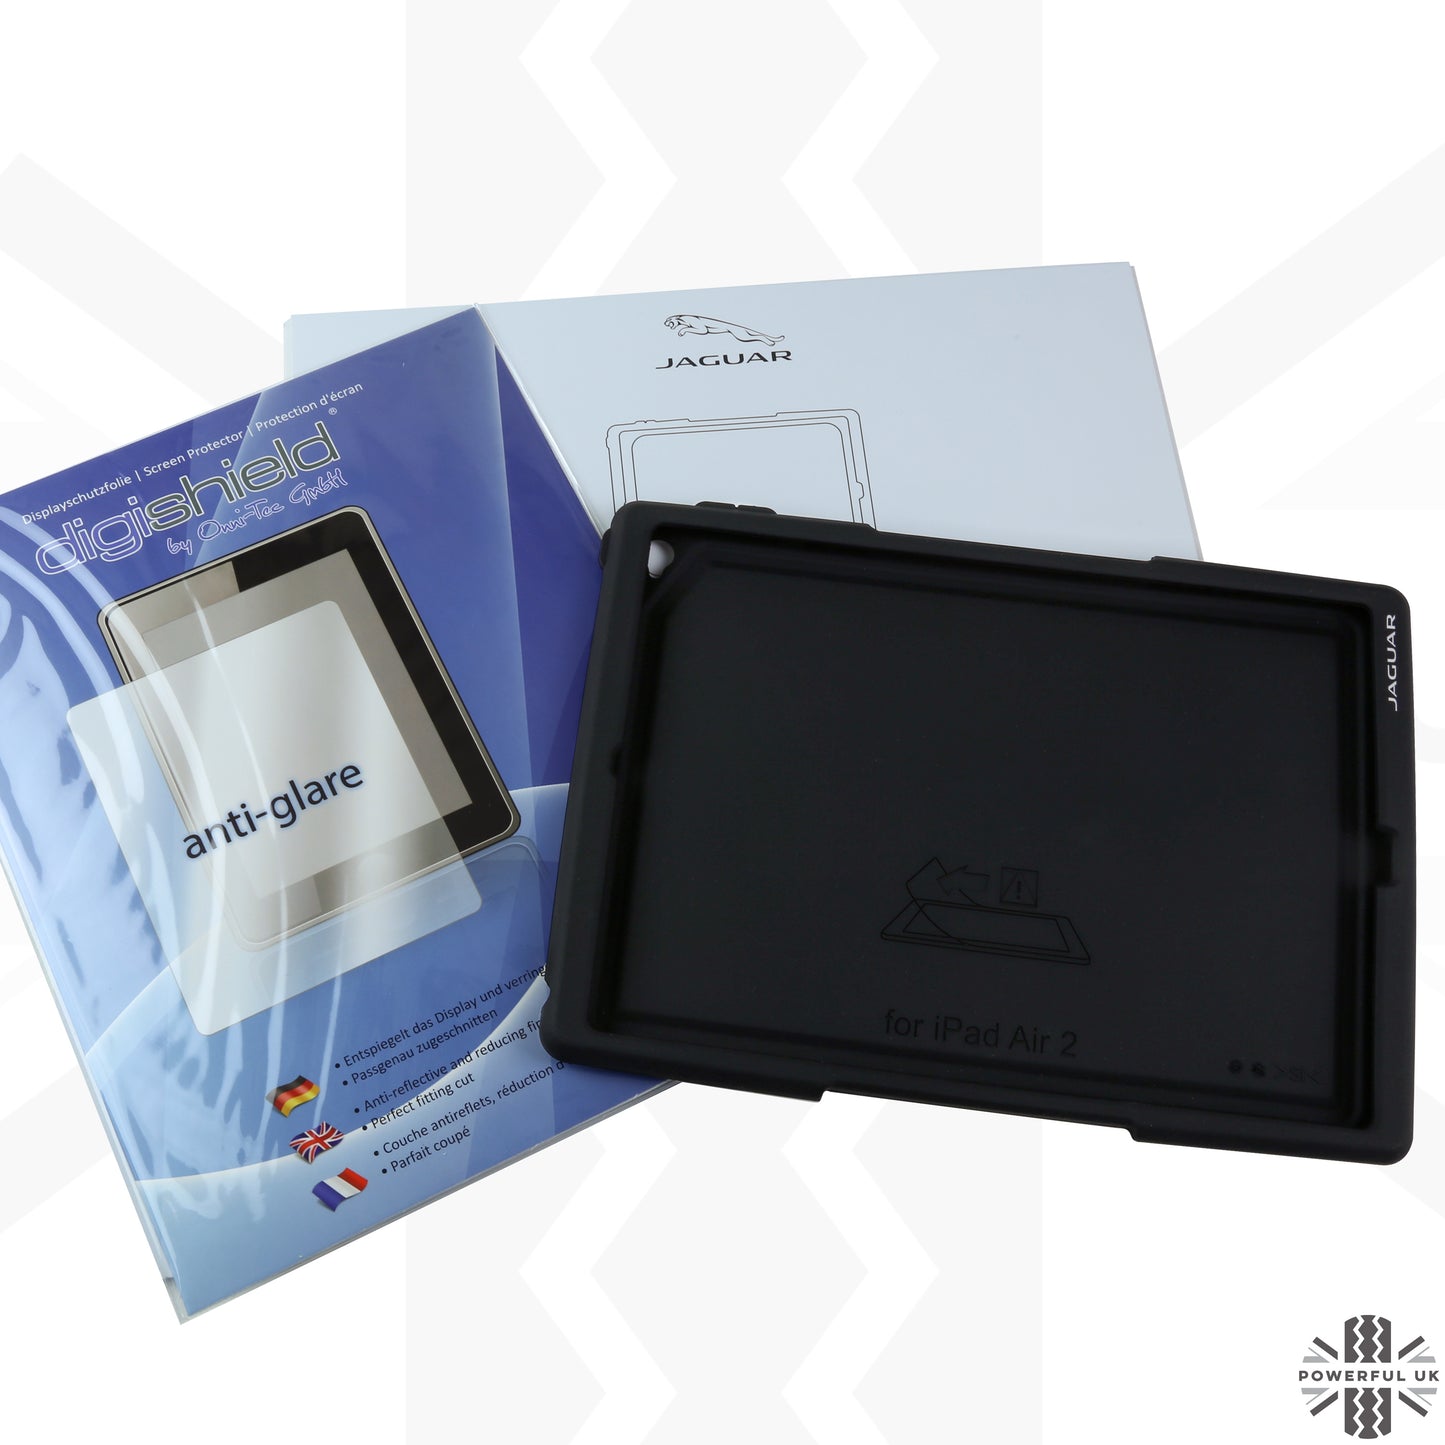 Click+Go Rubber iPad Air 2 Case (for use with Tablet Holder)